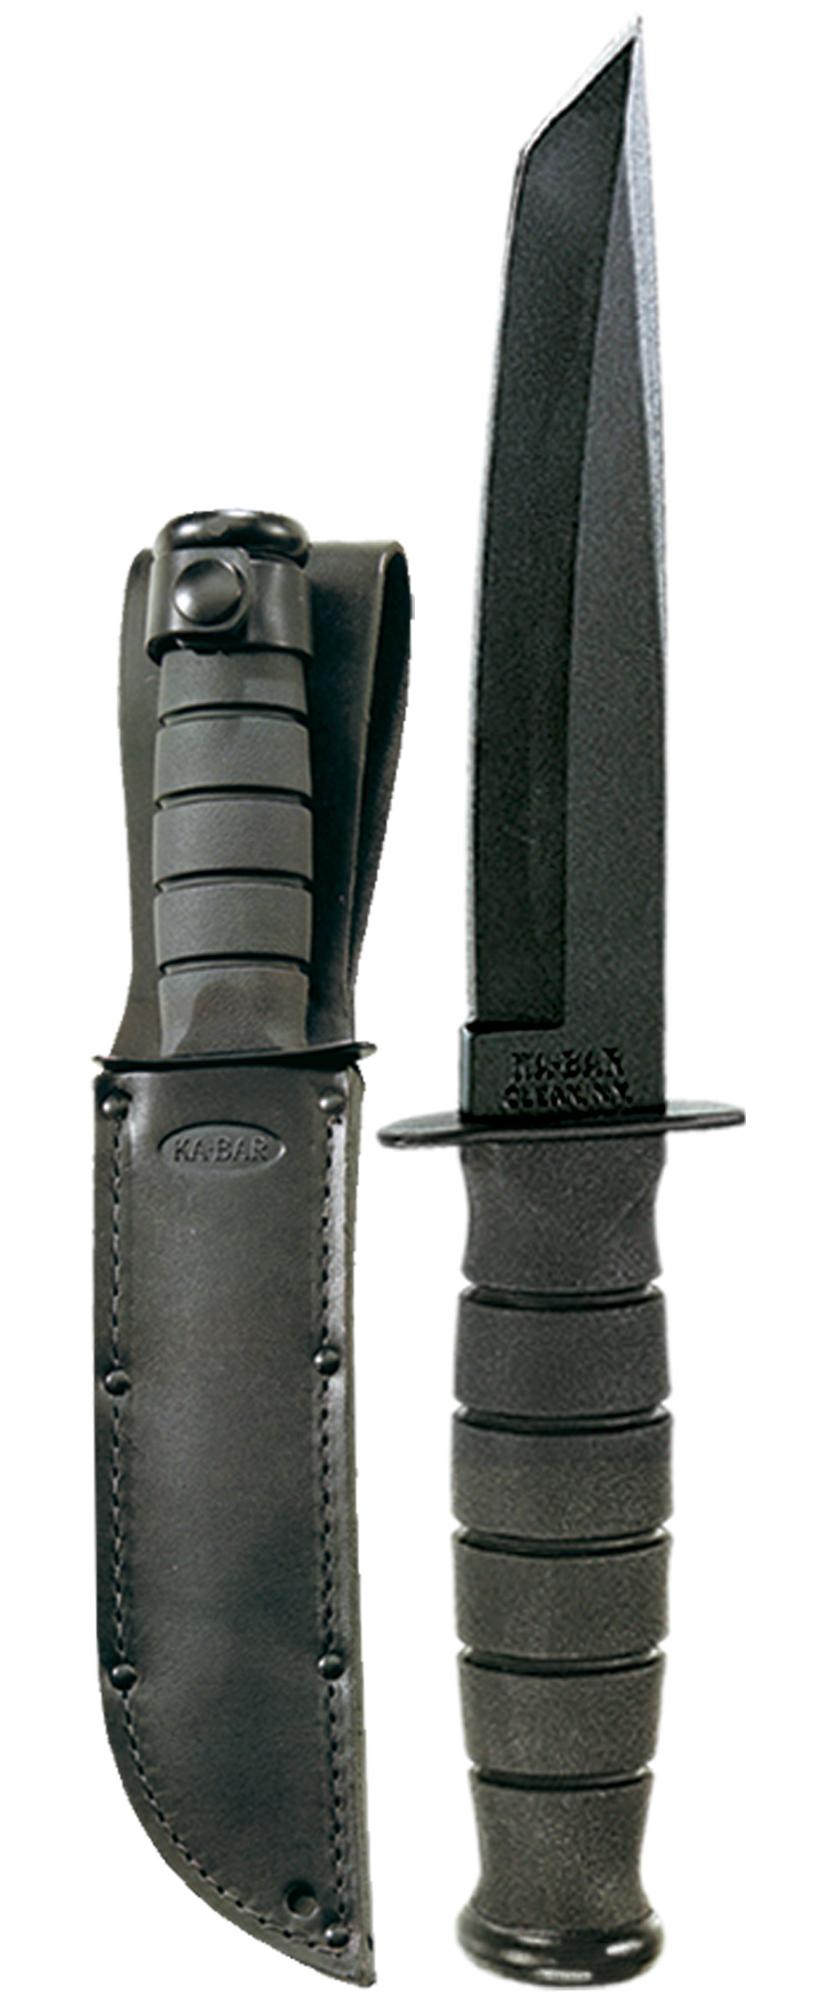 Short Tanto Overview